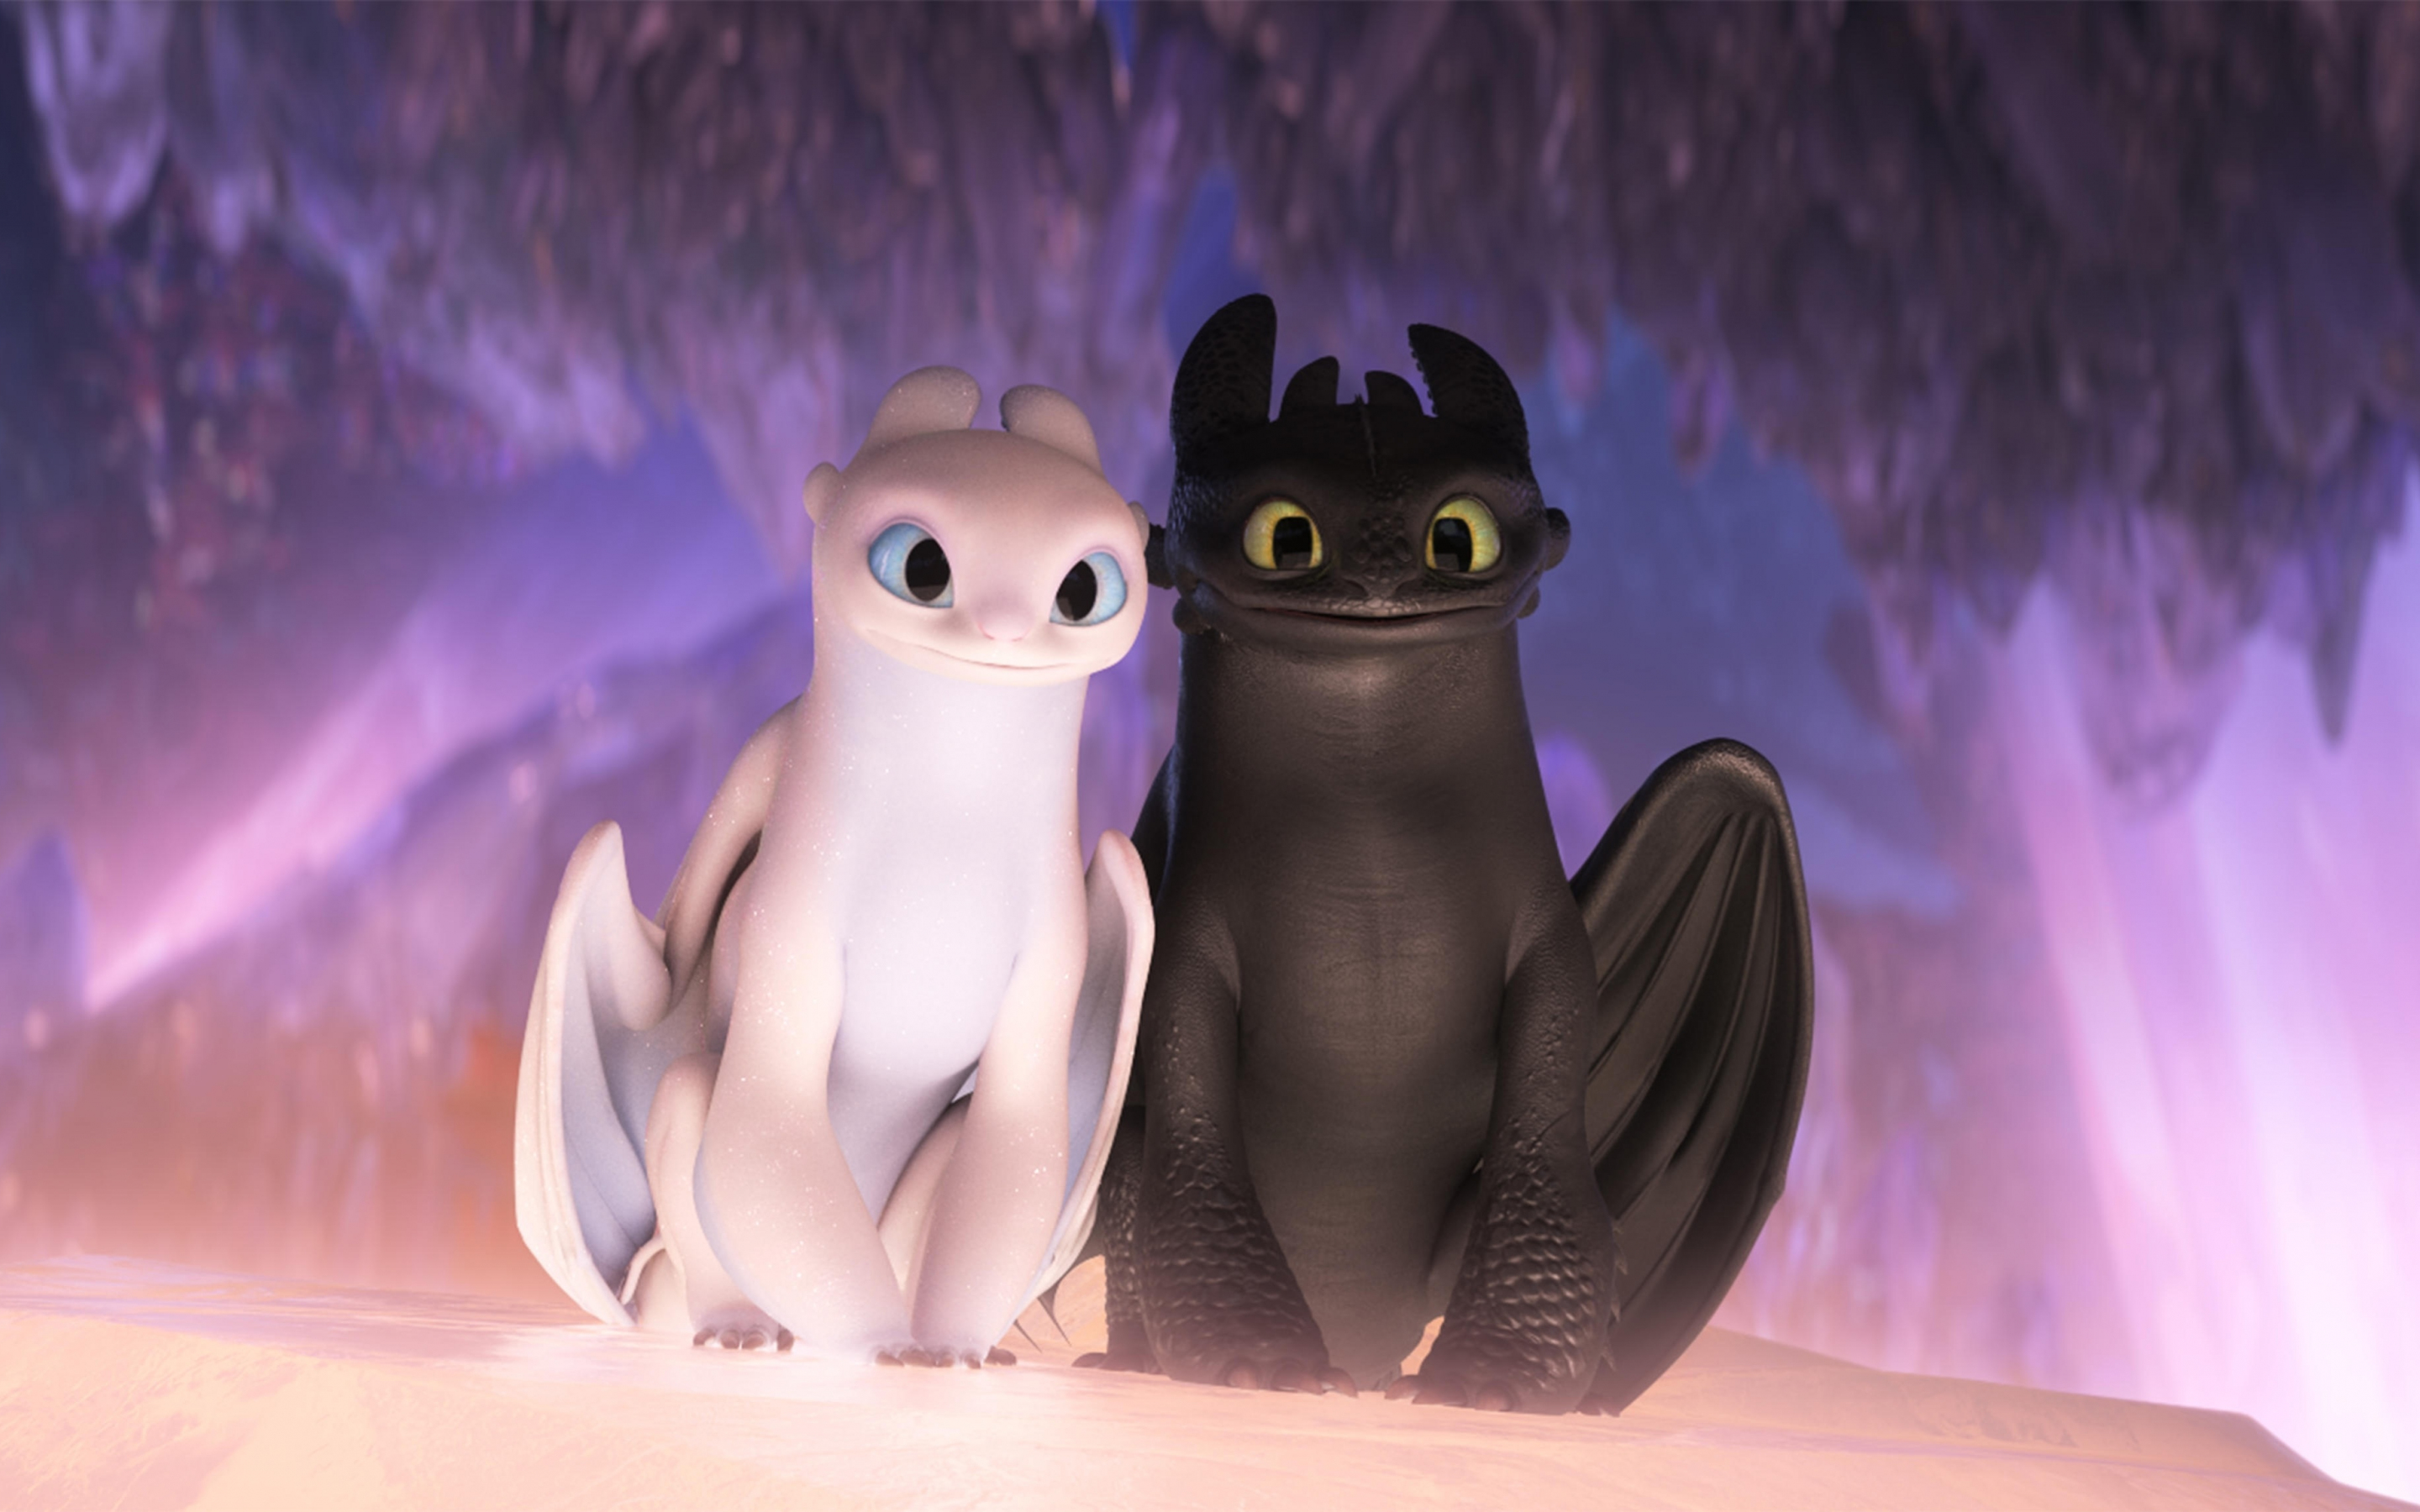 Dragon couple, How to Train Your Dragon, movie, 2019, 2880x1800 wallpaper